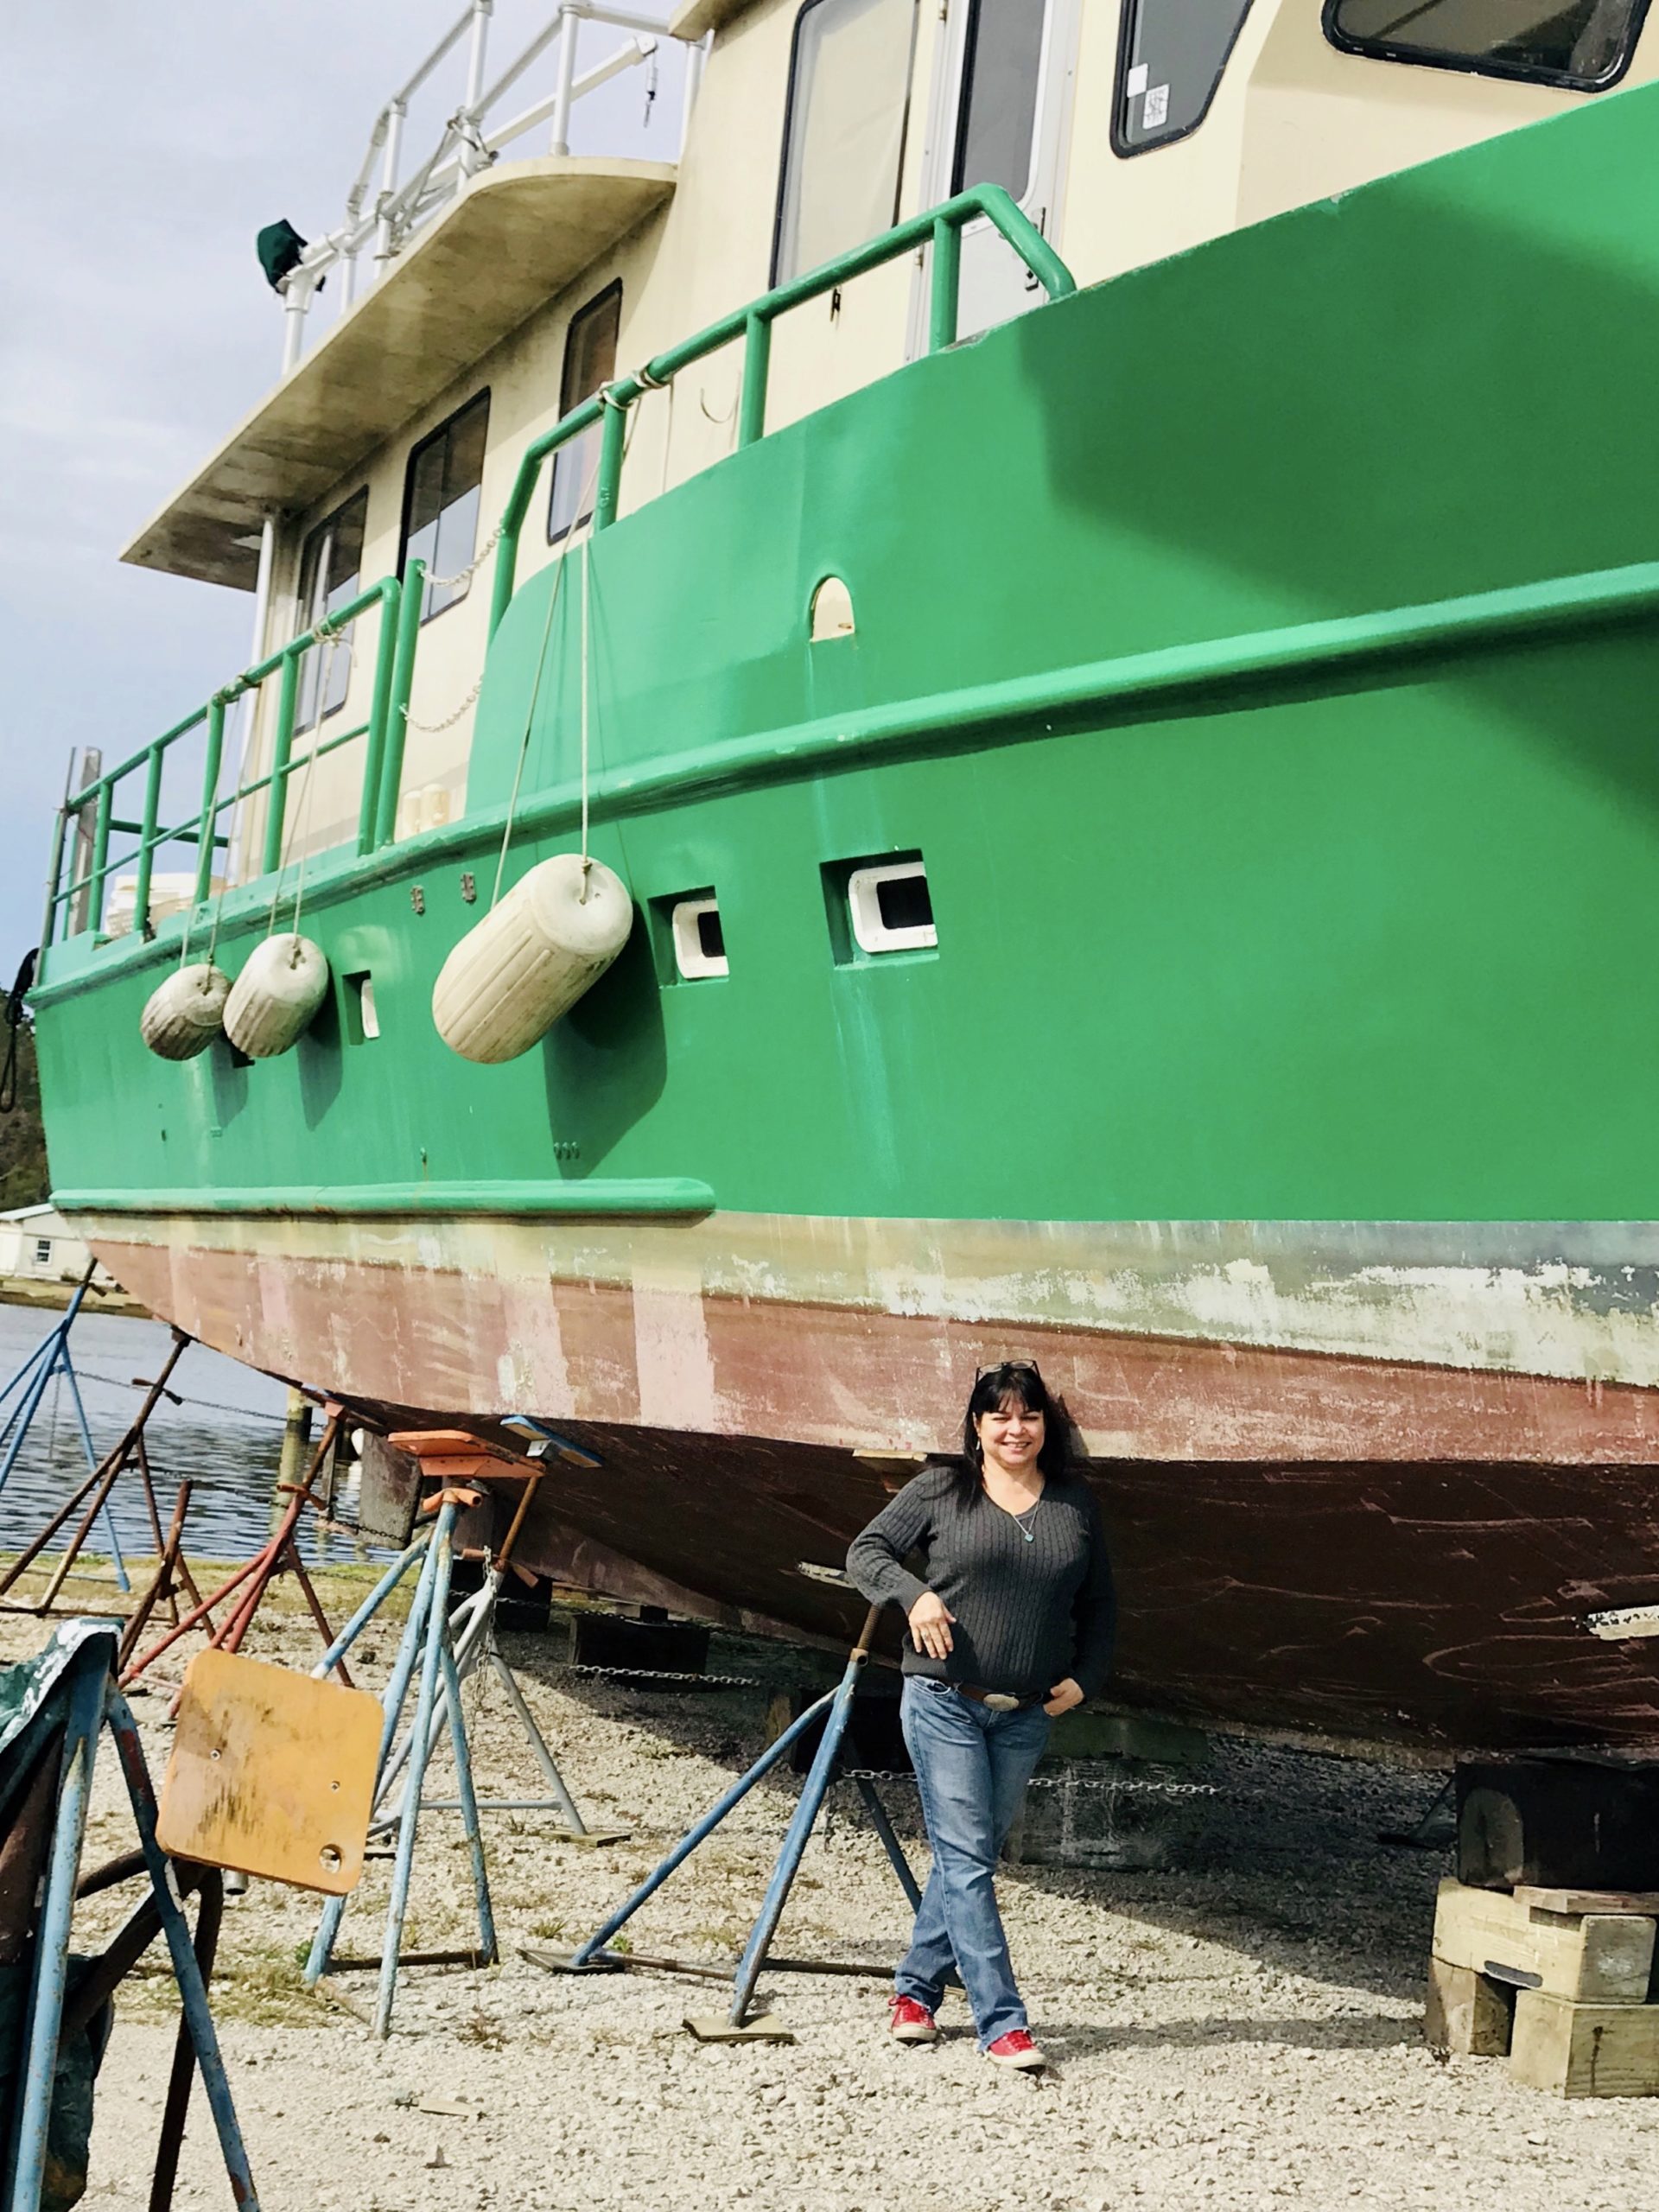 Gari's standing in front of the boat